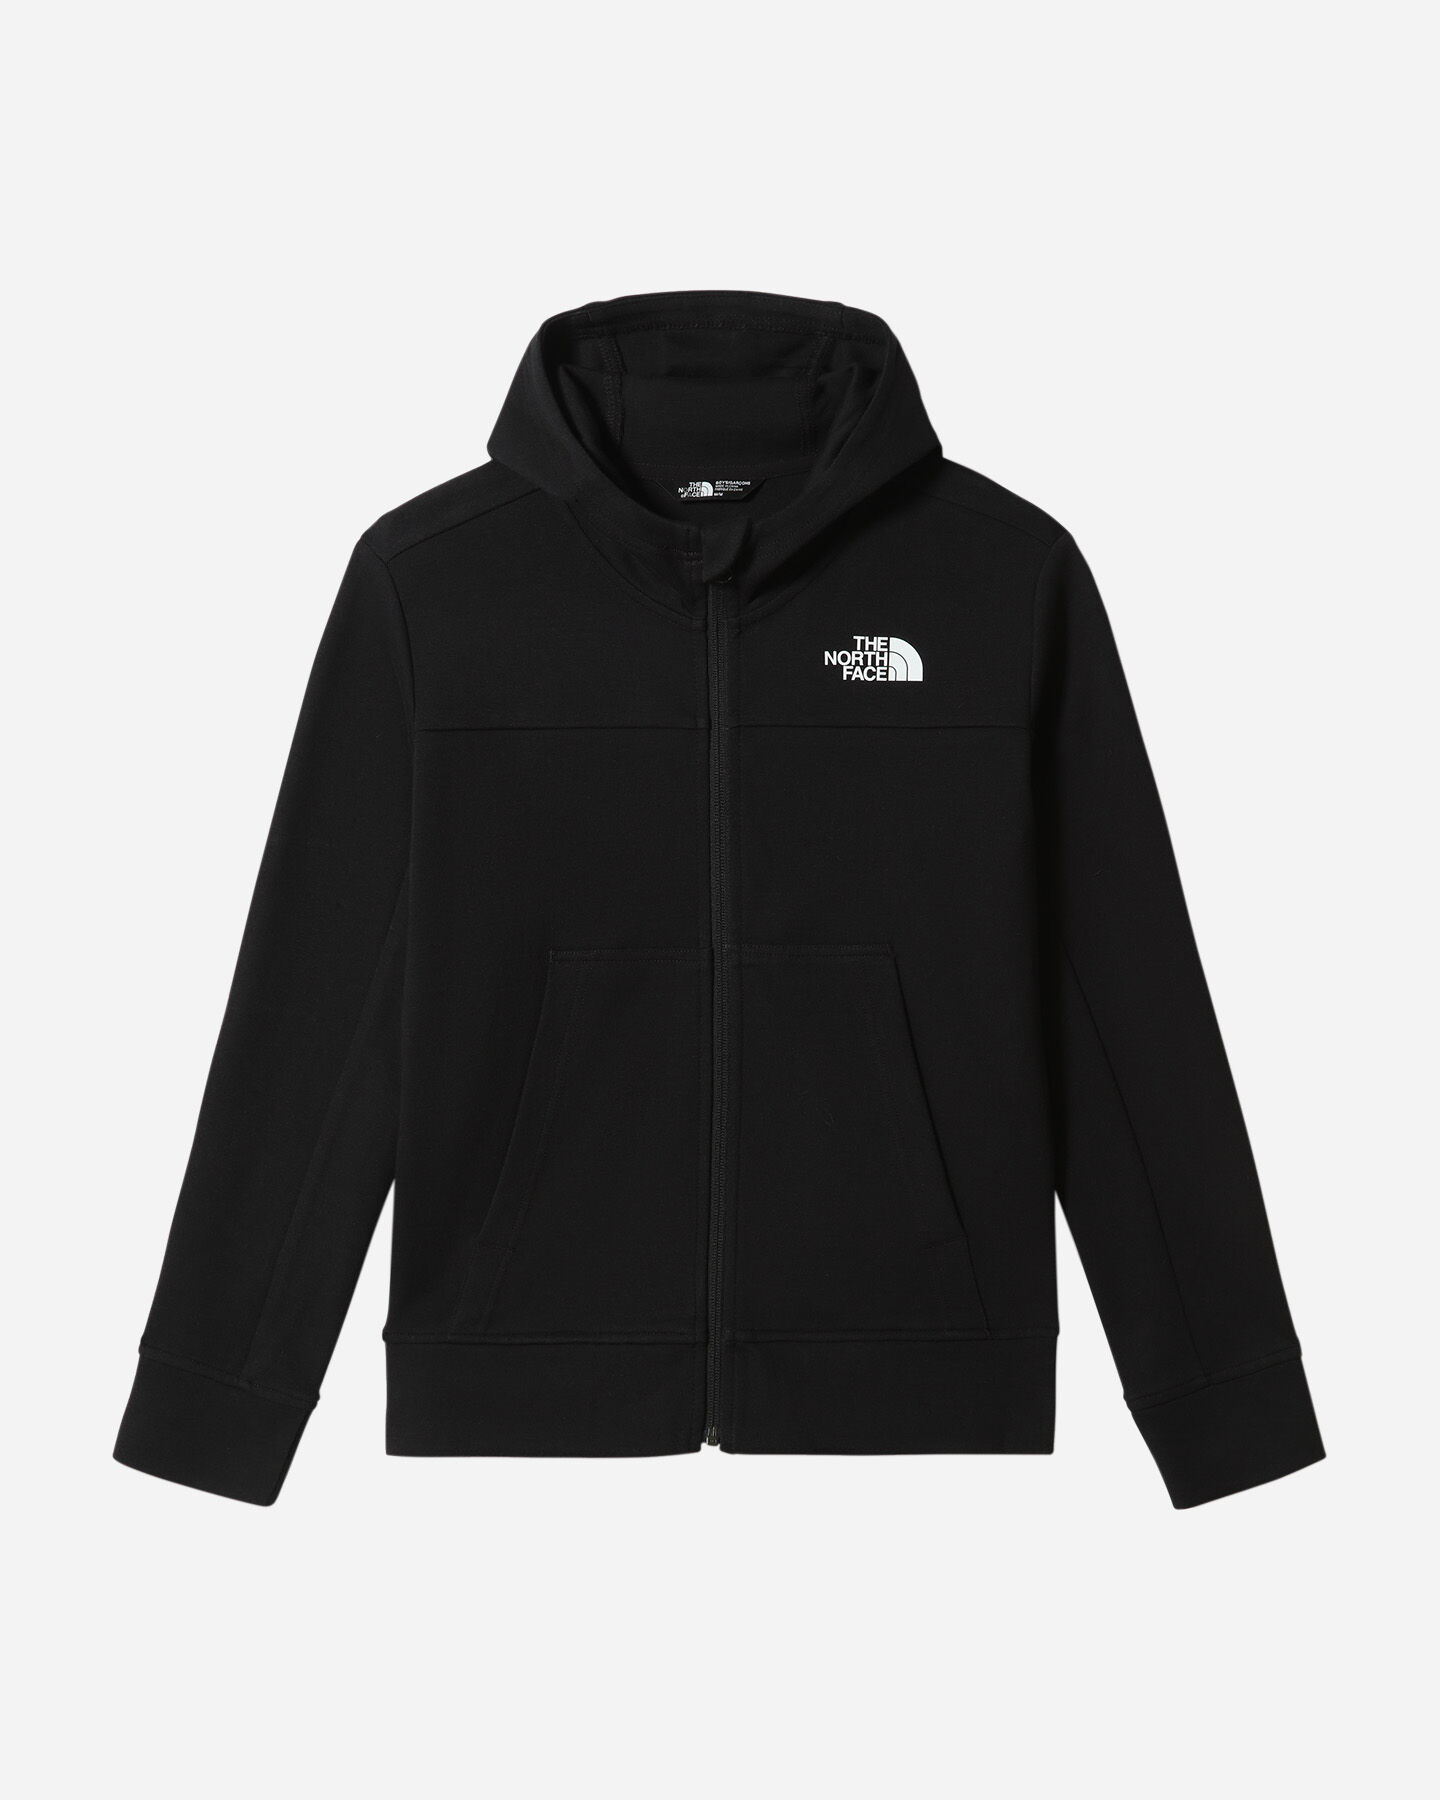  Pile THE NORTH FACE FULL ZIP HD JR S5422634|KX7|XS scatto 0